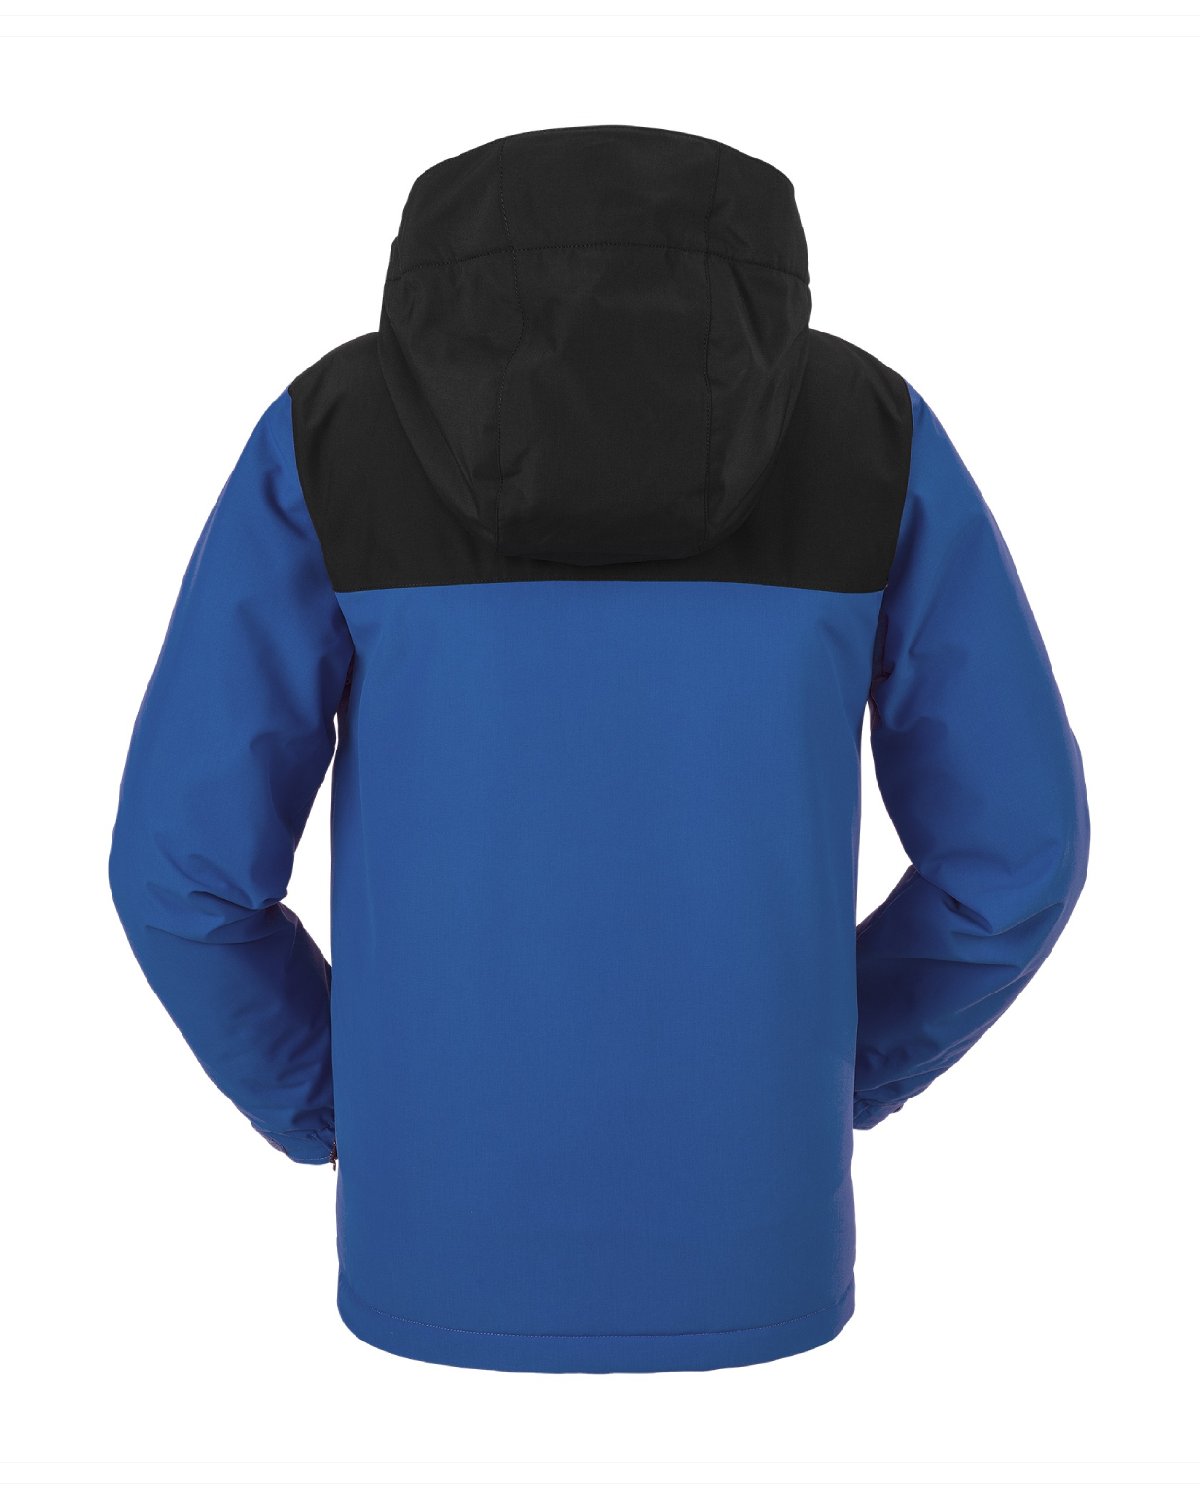 Volcom Kids Stone.91 Insulated Ski Jacket in Electric Blue (Ages 6 - 14)